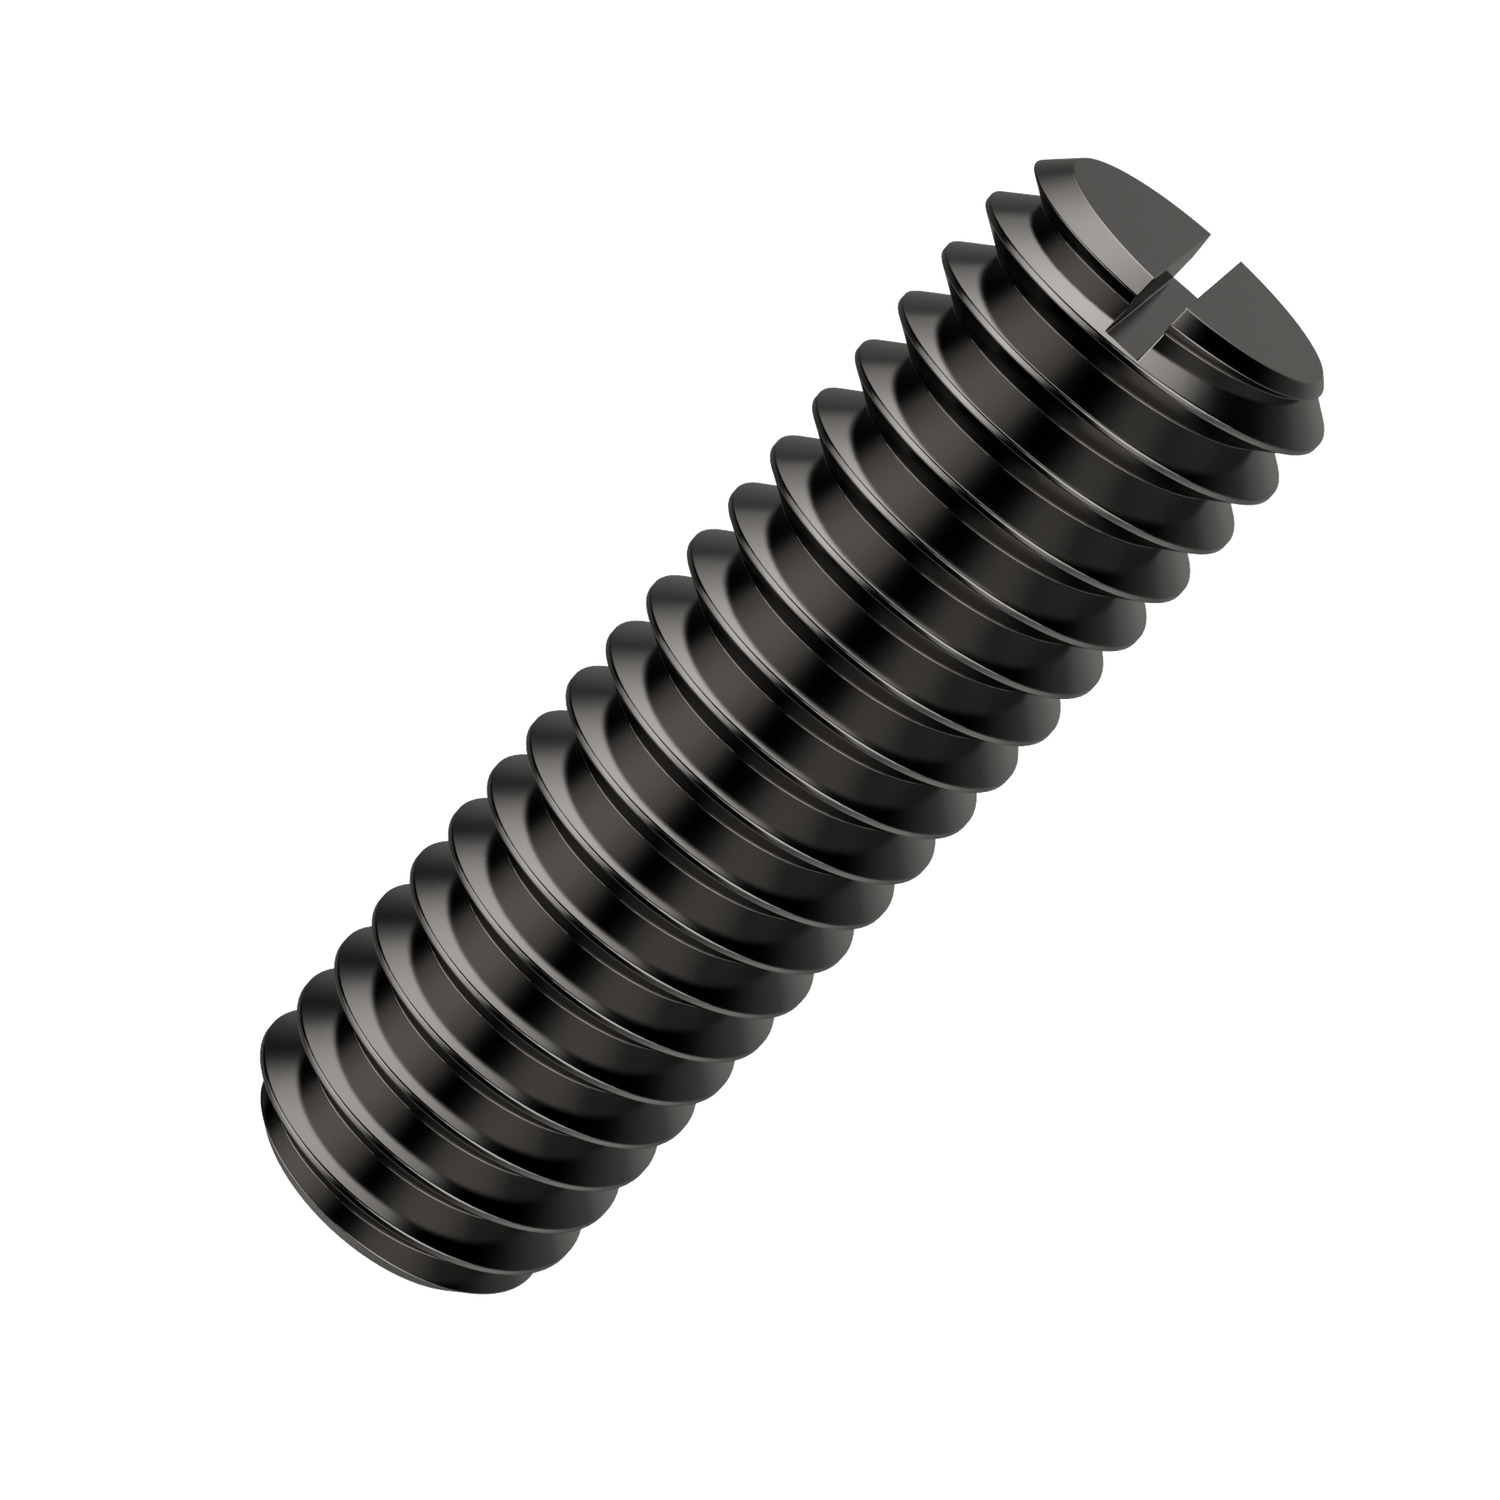 34300.W0167 Threaded rod - WHILE STOCKS LAST! M16 - 70. Please note, supplied in multiples of 5  WHILE STOCKS LAST!